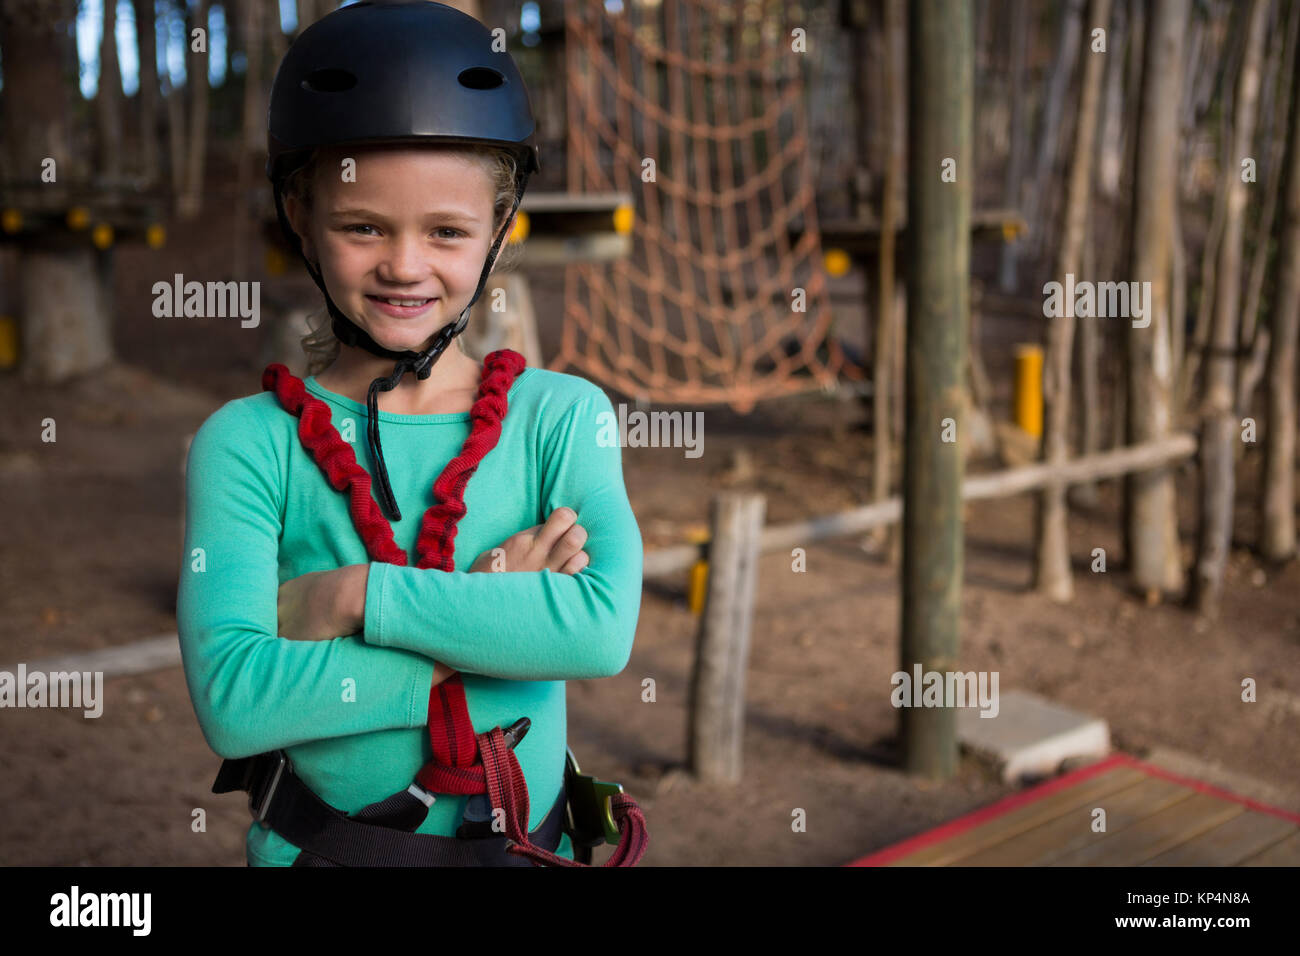 Portrait of little girl folding her hands wearing helmet and harness in the forest Stock Photo